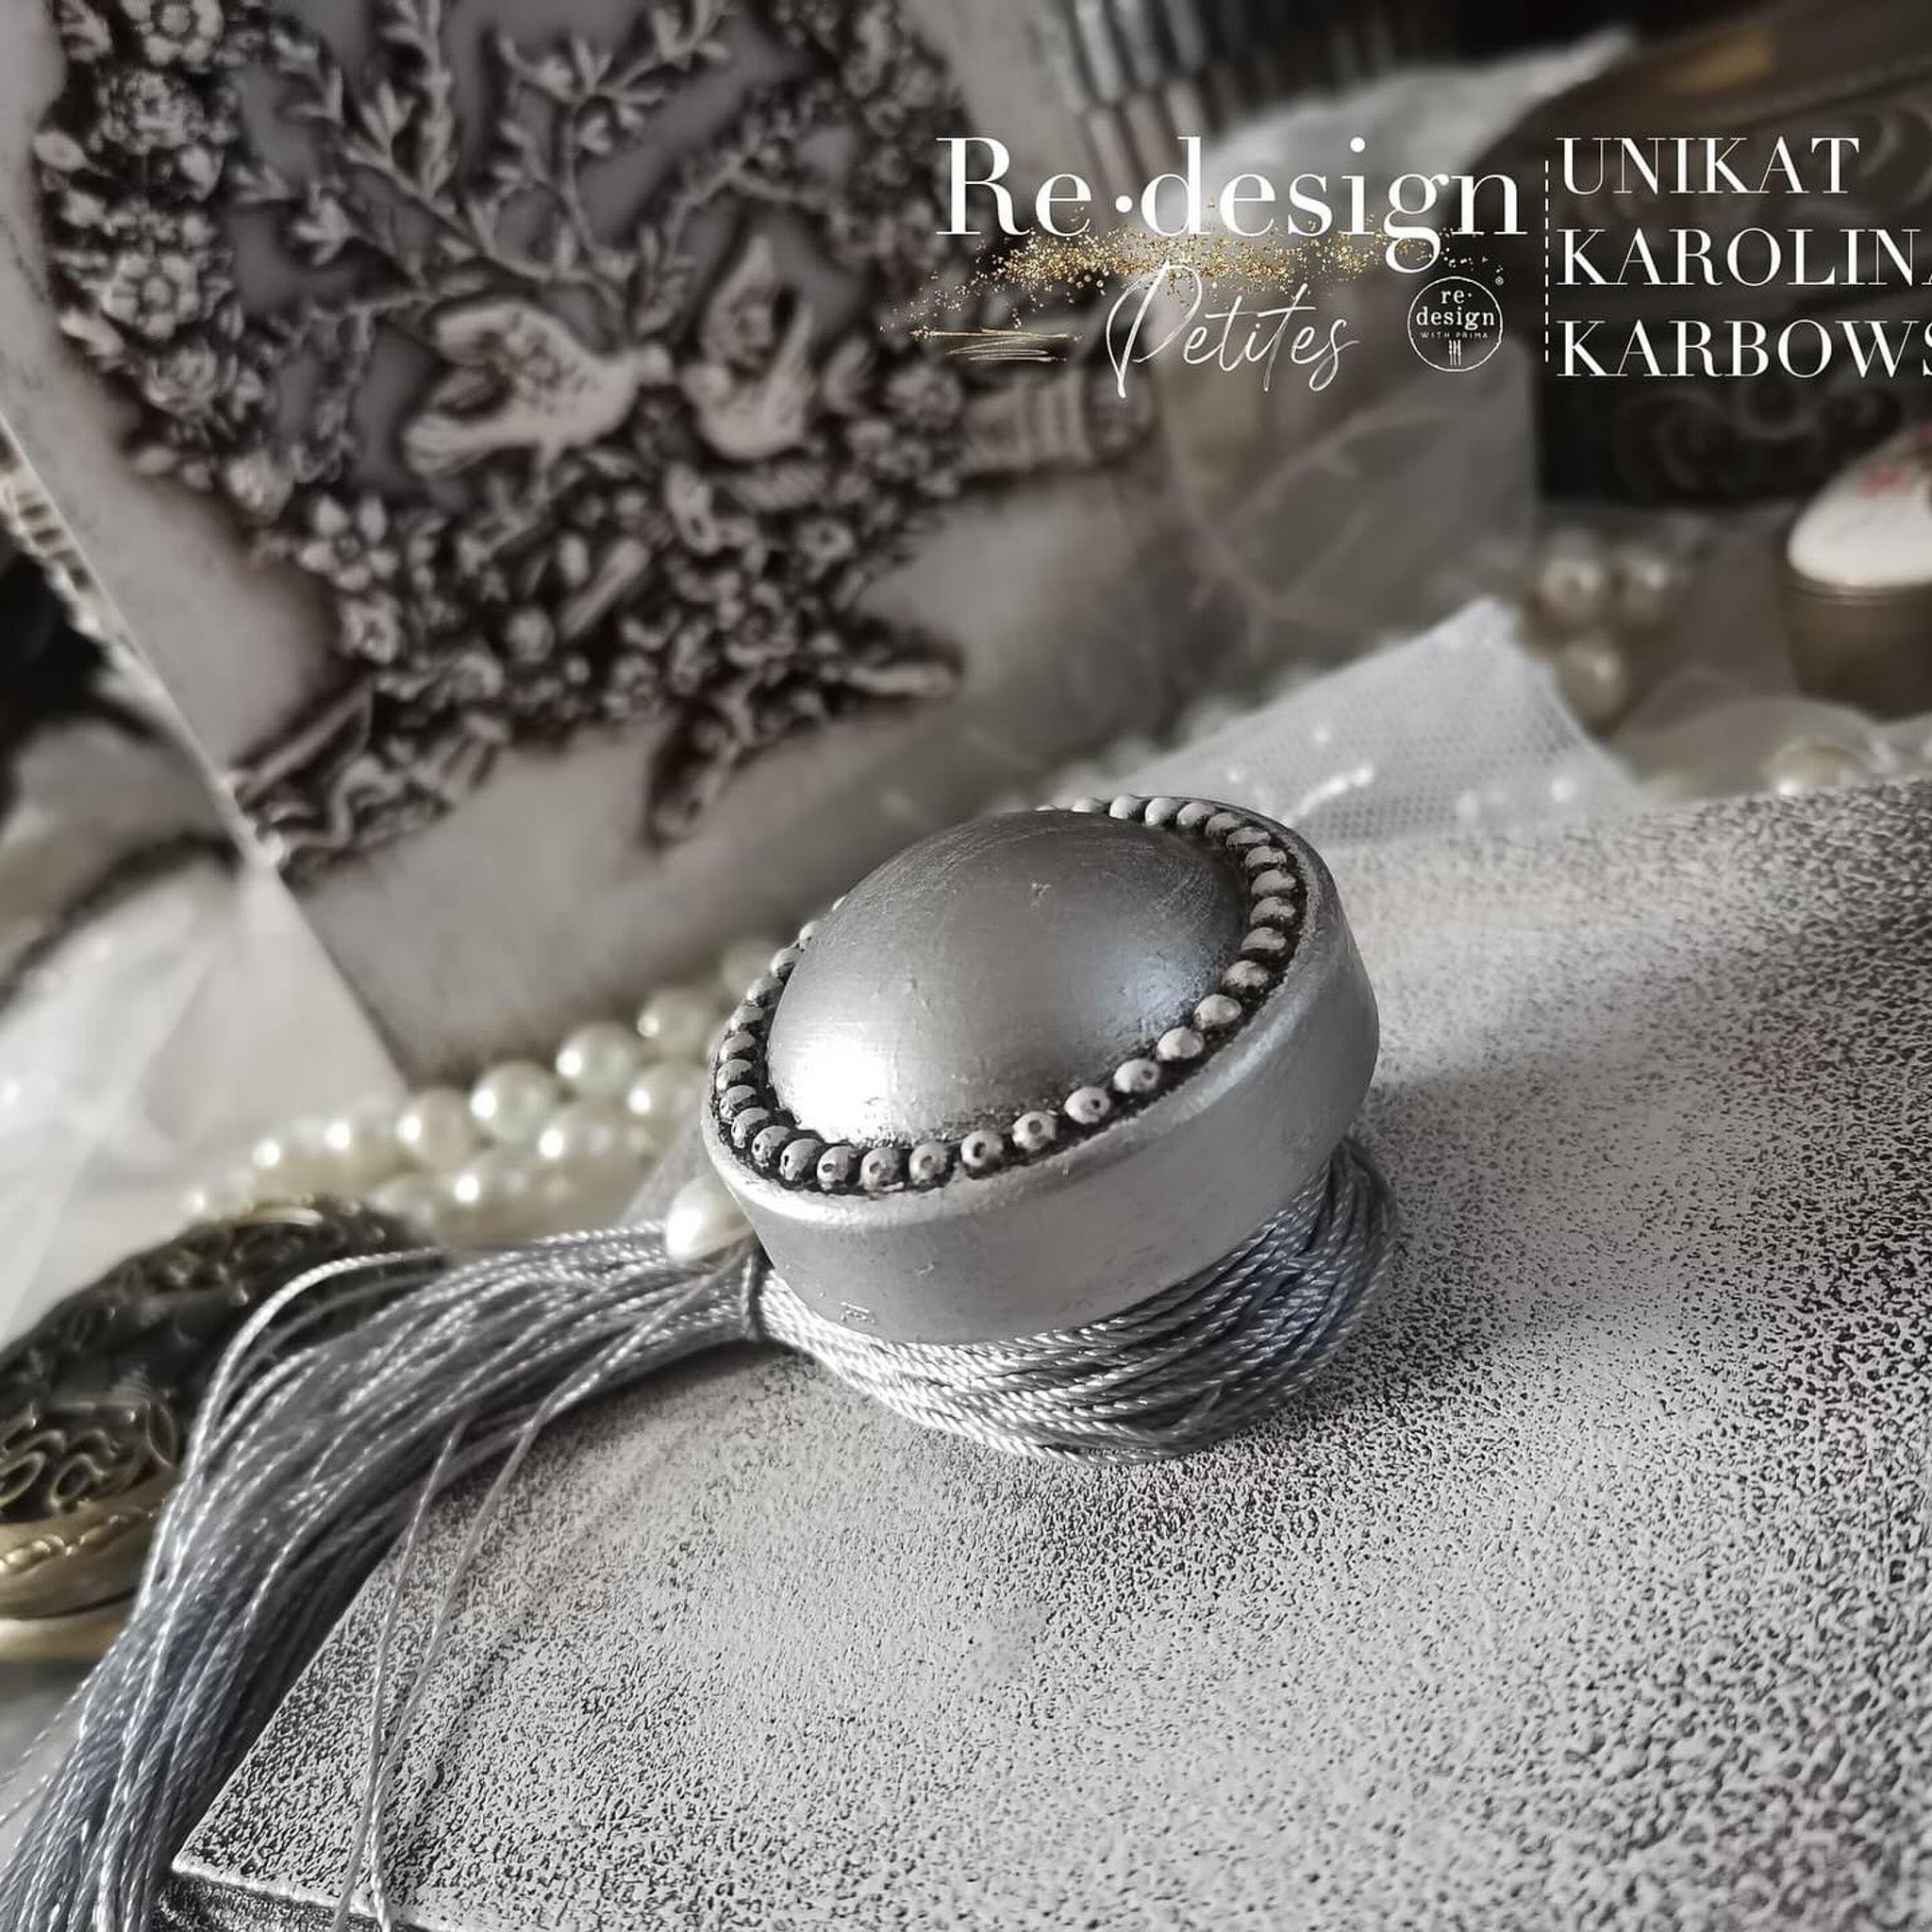 Close-up of a silver-colored, round, pearl-edged drawer knob created by Unikat Karolina Karbowska using ReDesign with Prima's Pearl Inlay 3D Knob silicone mold.